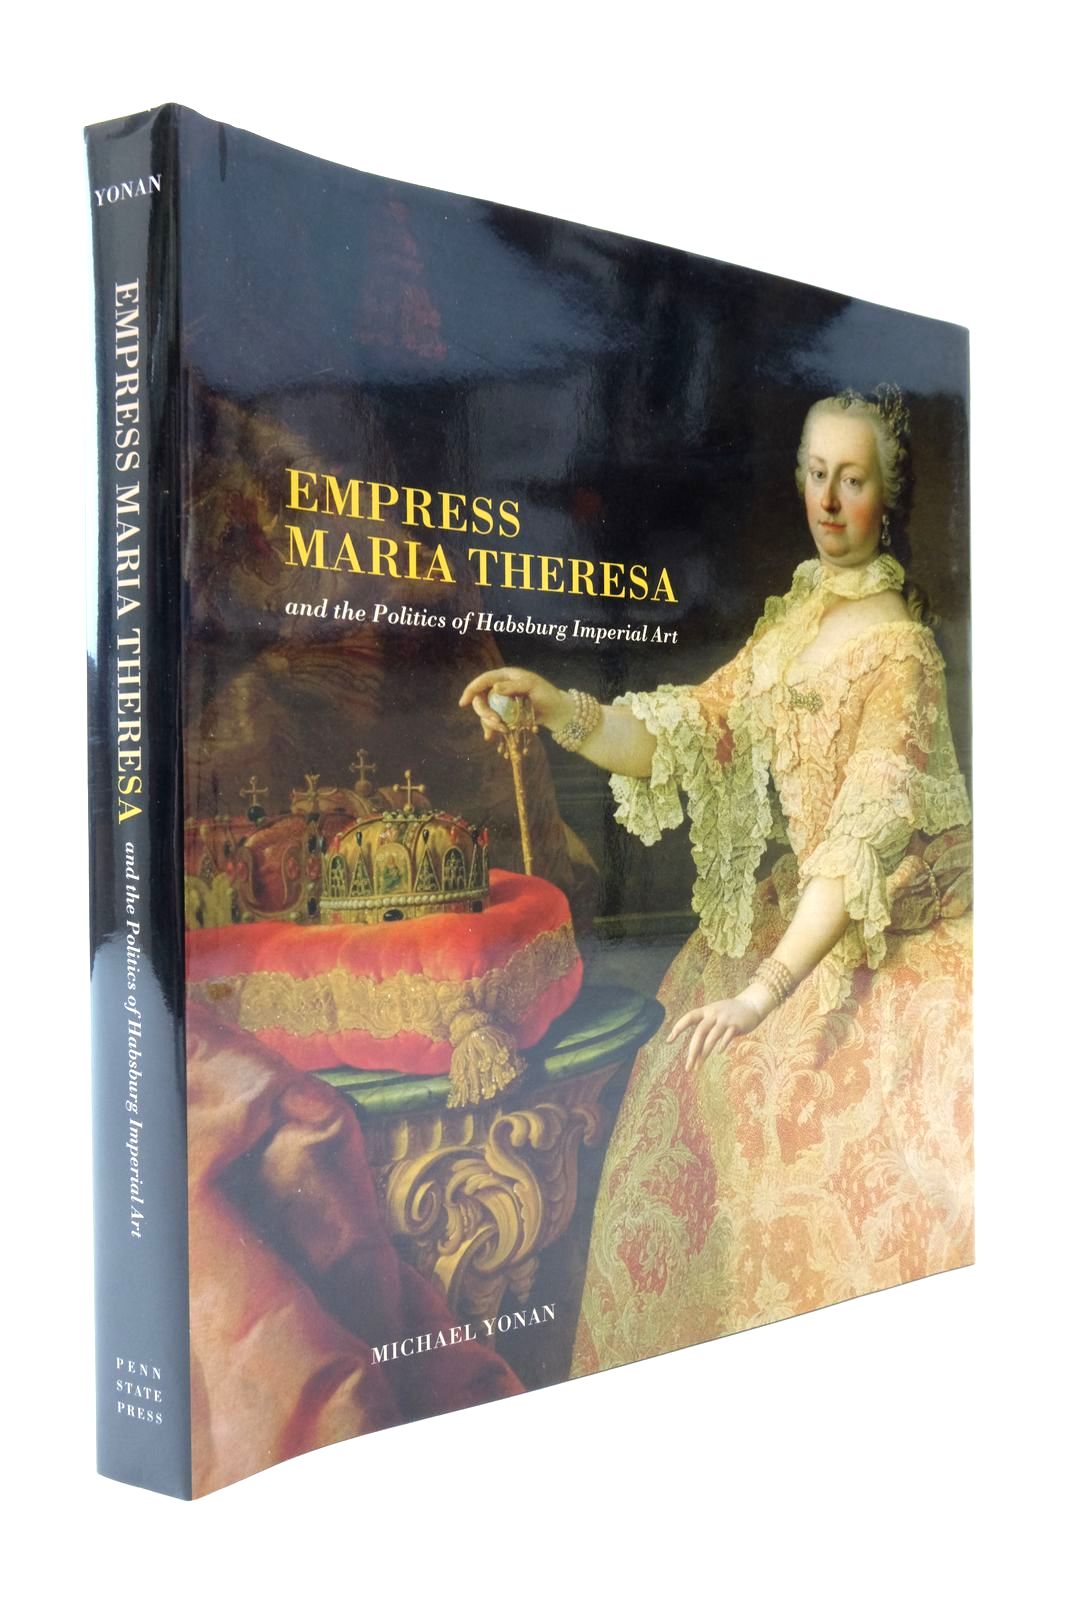 Photo of EMPRESS MARIA THERESA AND THE POLITICS OF HABSBURG IMPERIAL ART- Stock Number: 2138777